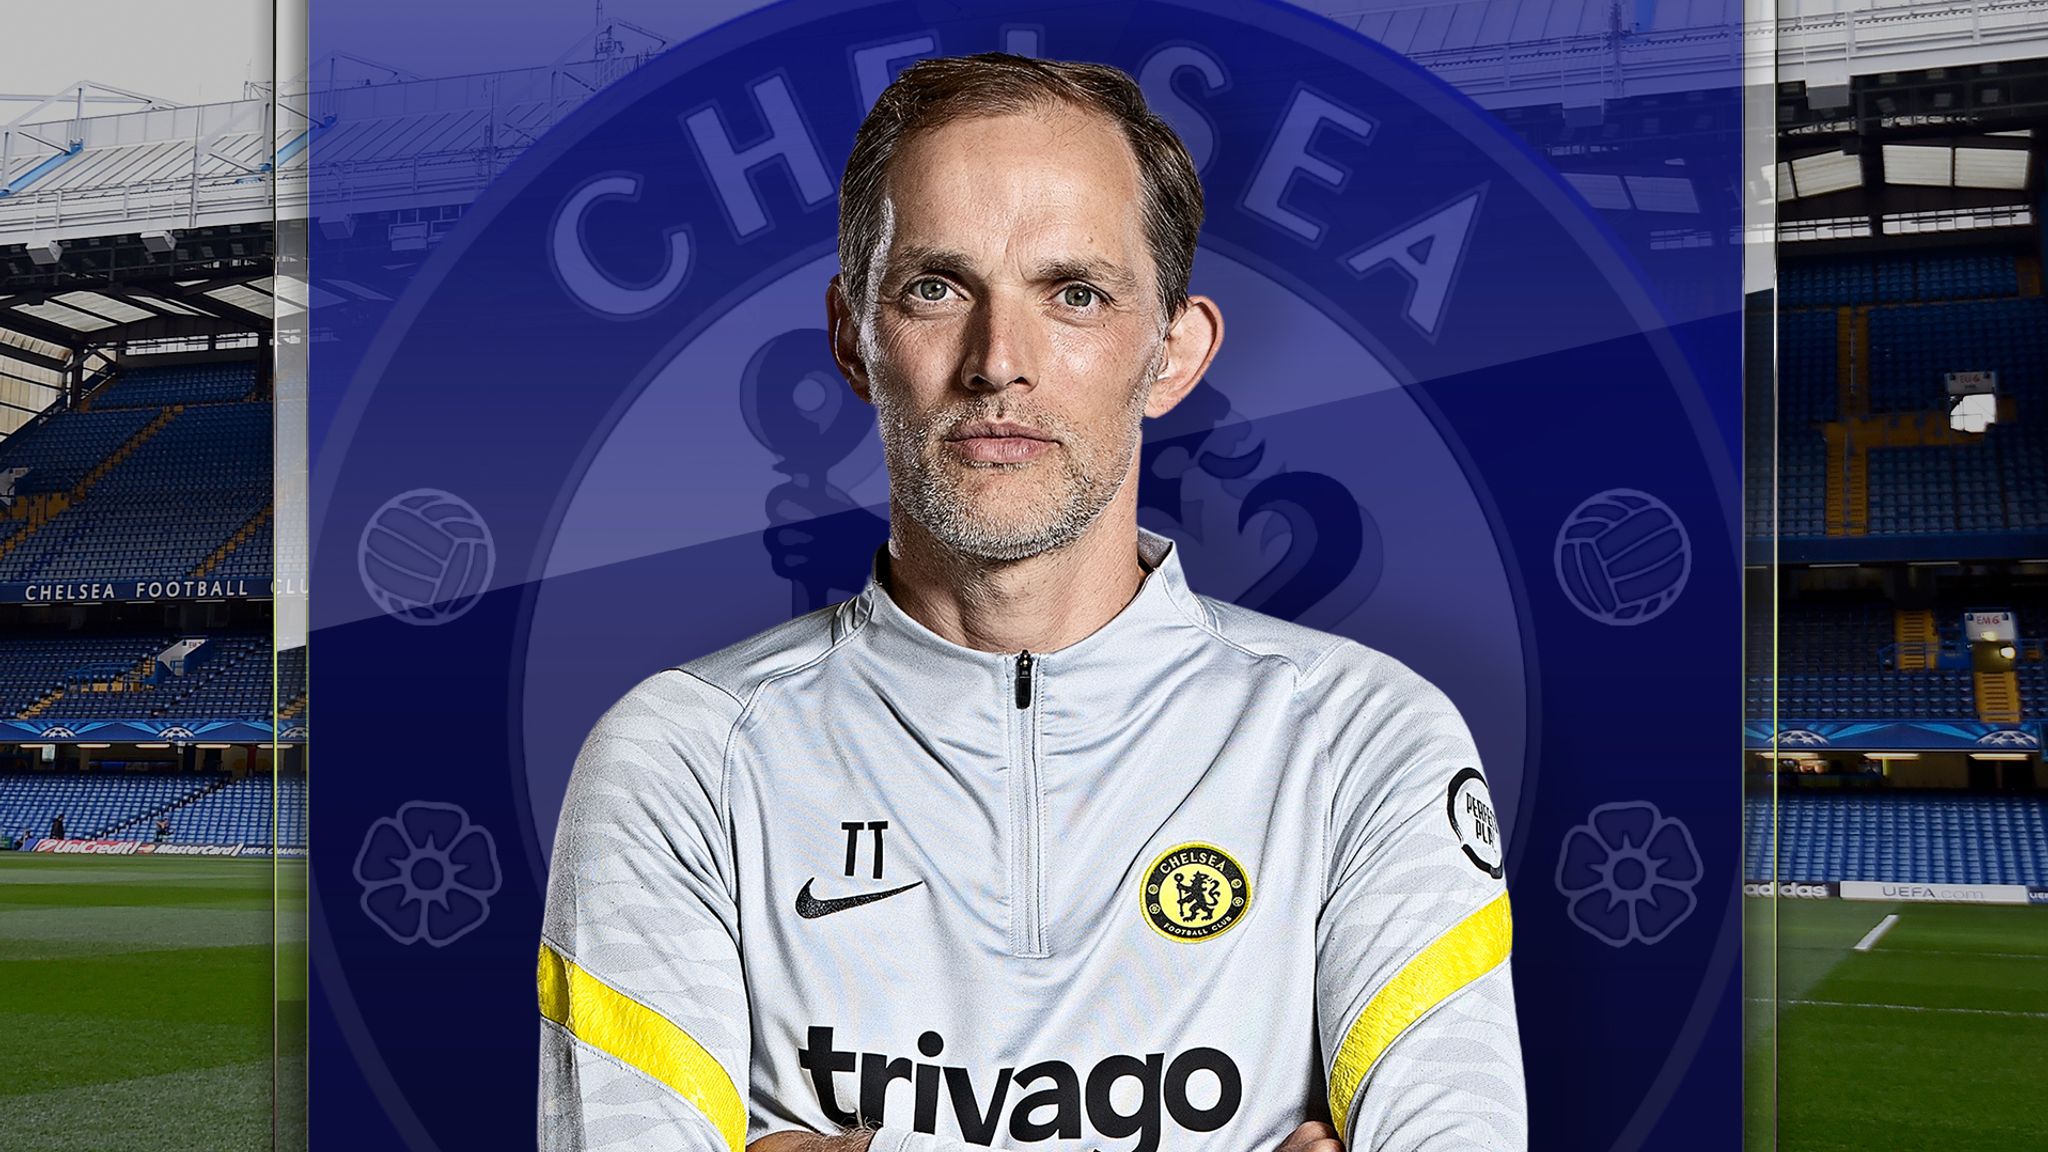 Thomas Tuchel on Expected Goals, unexpected goals and how to stop individual errors costing Chelsea | Football News | Sky Sports